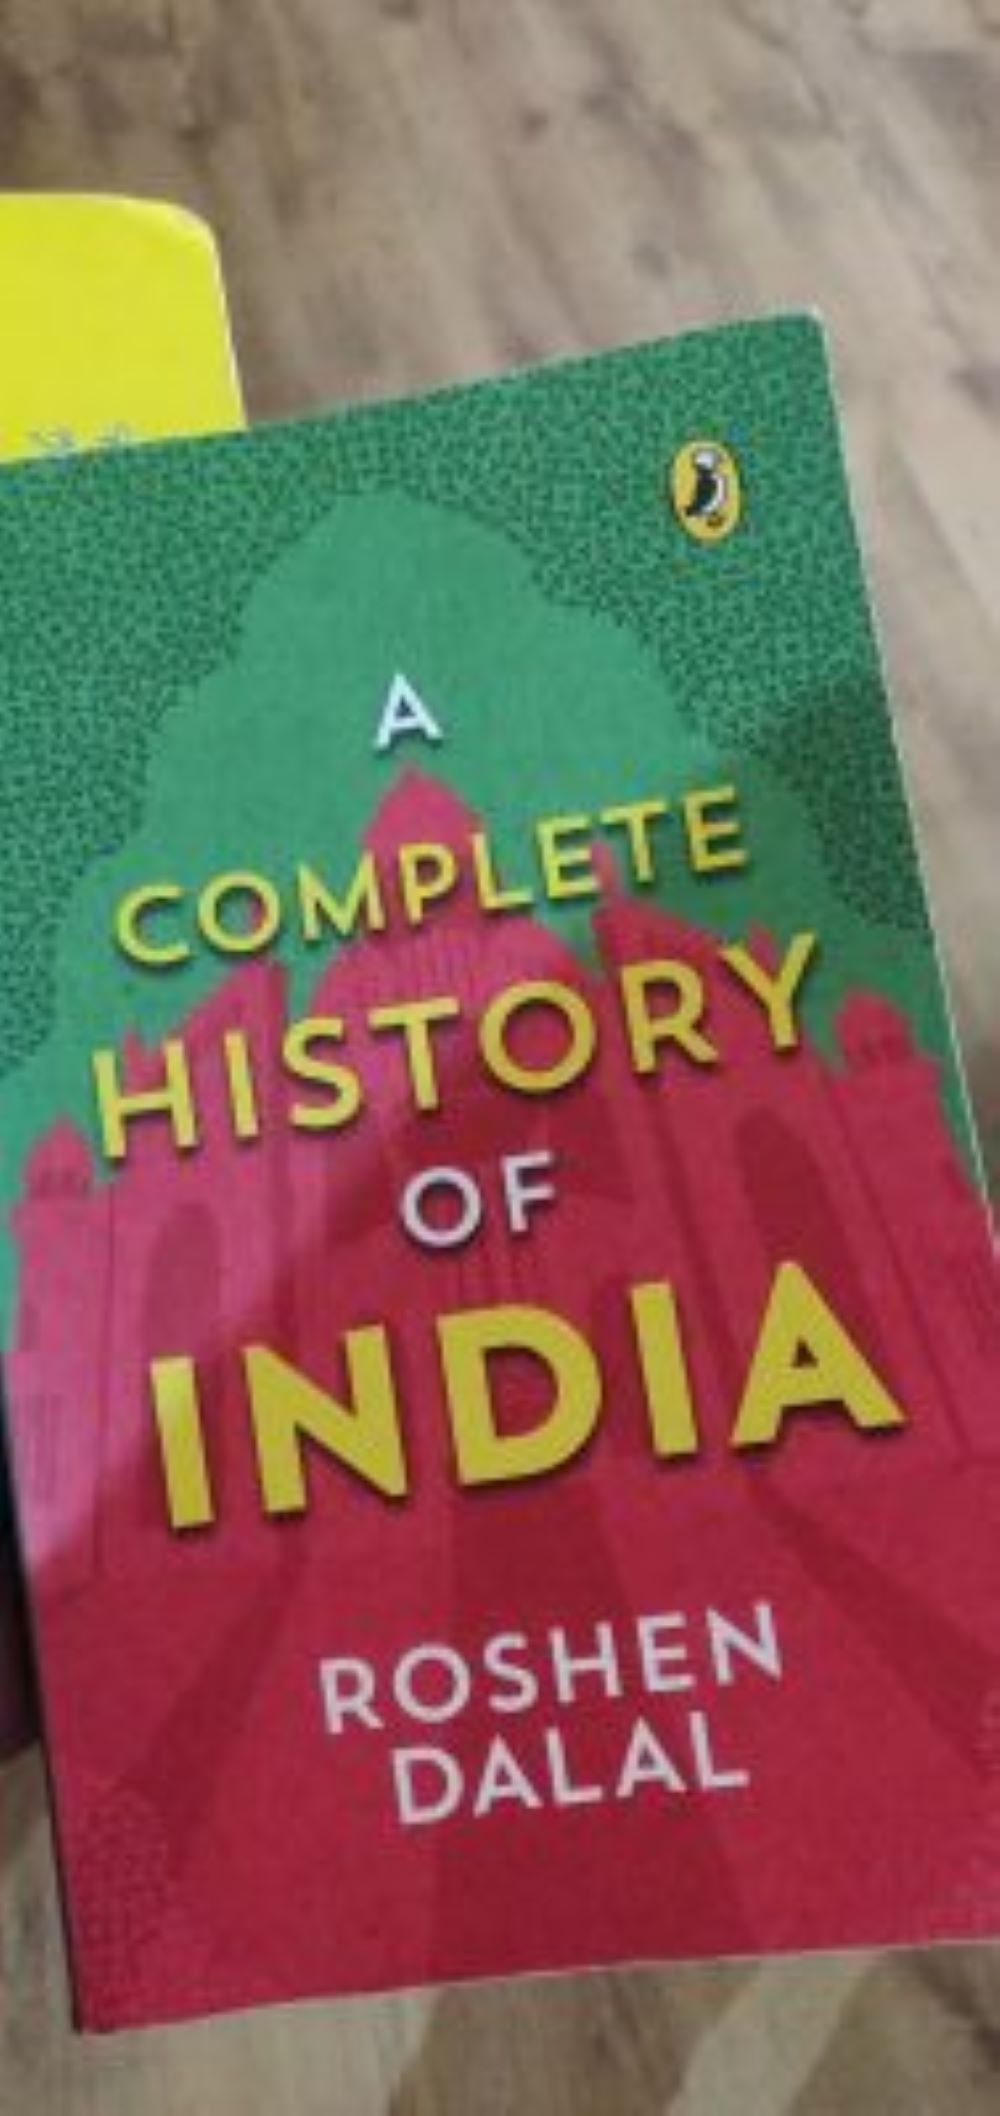 Review: A Complete History of India